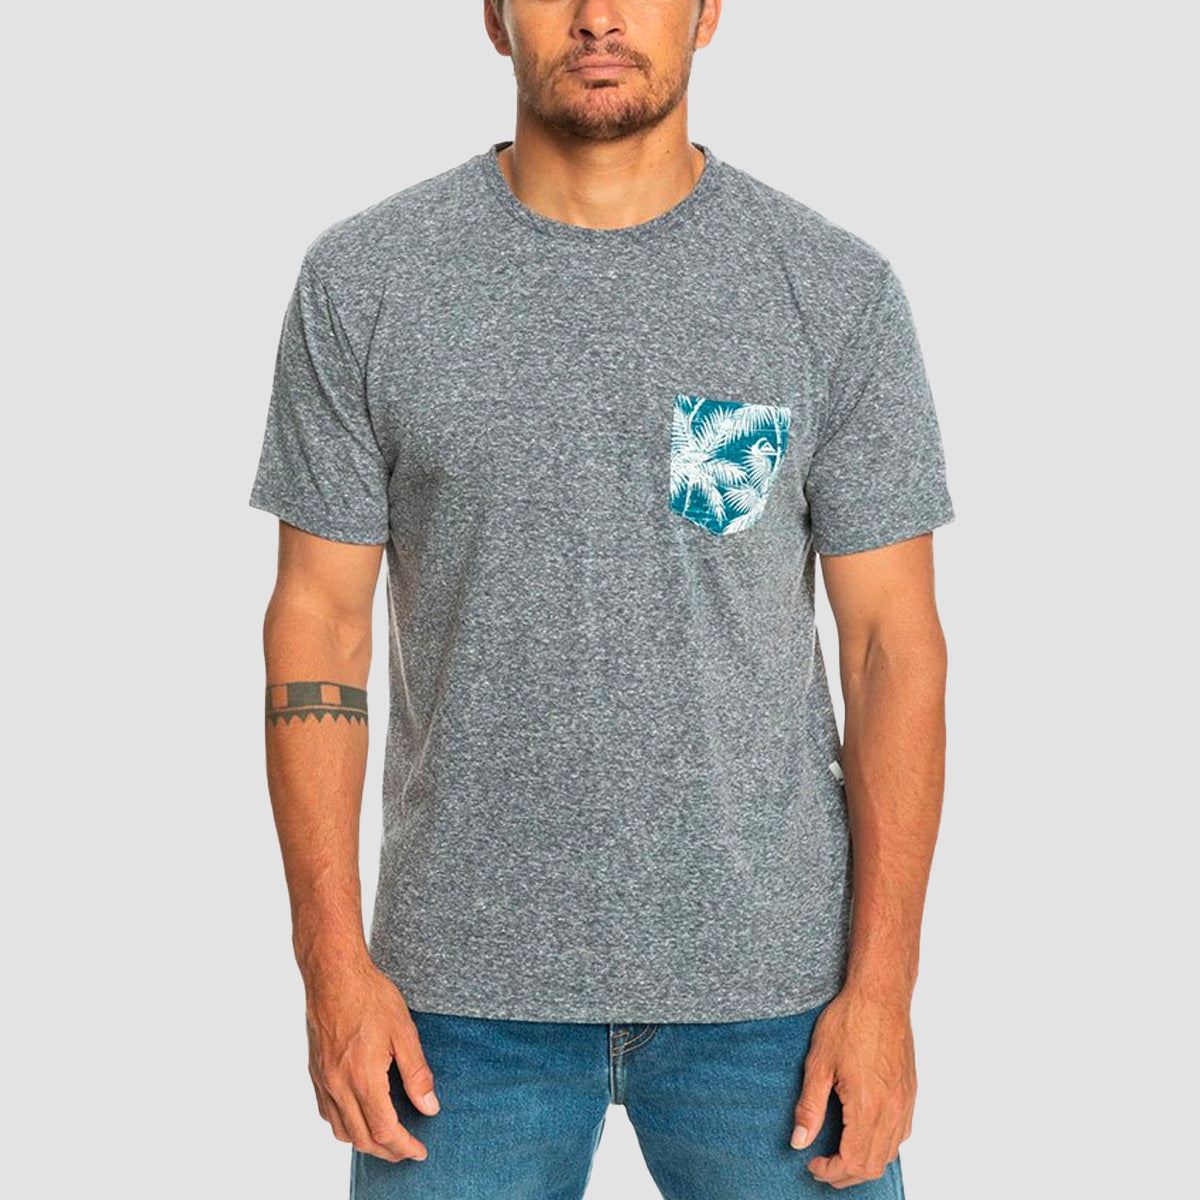 Quiksilver Men's T-Shirts | Rollersnakes